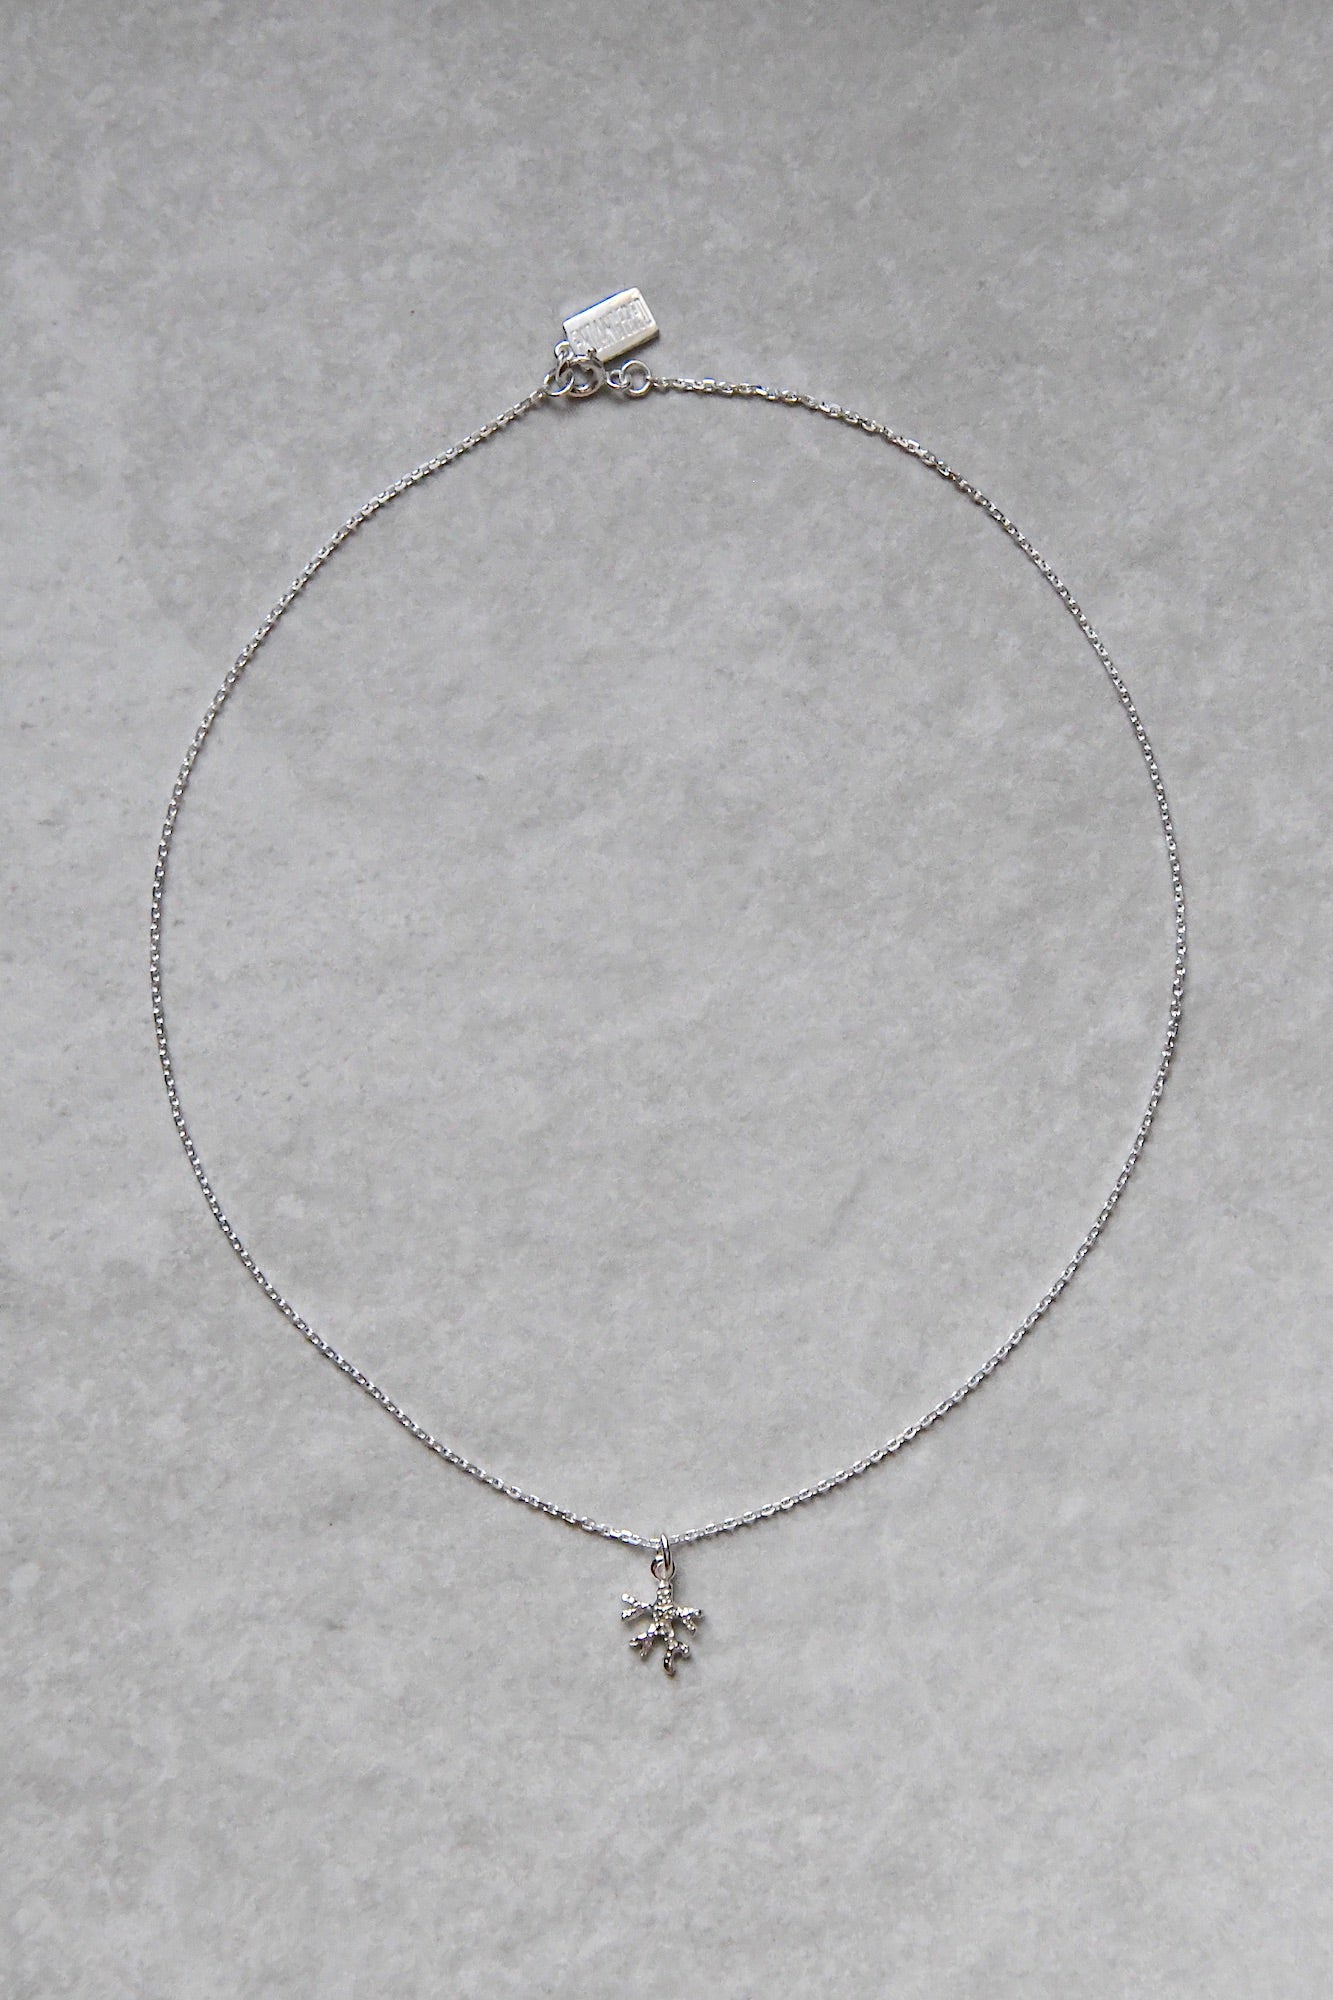 Mini-me Staghorn coral necklace